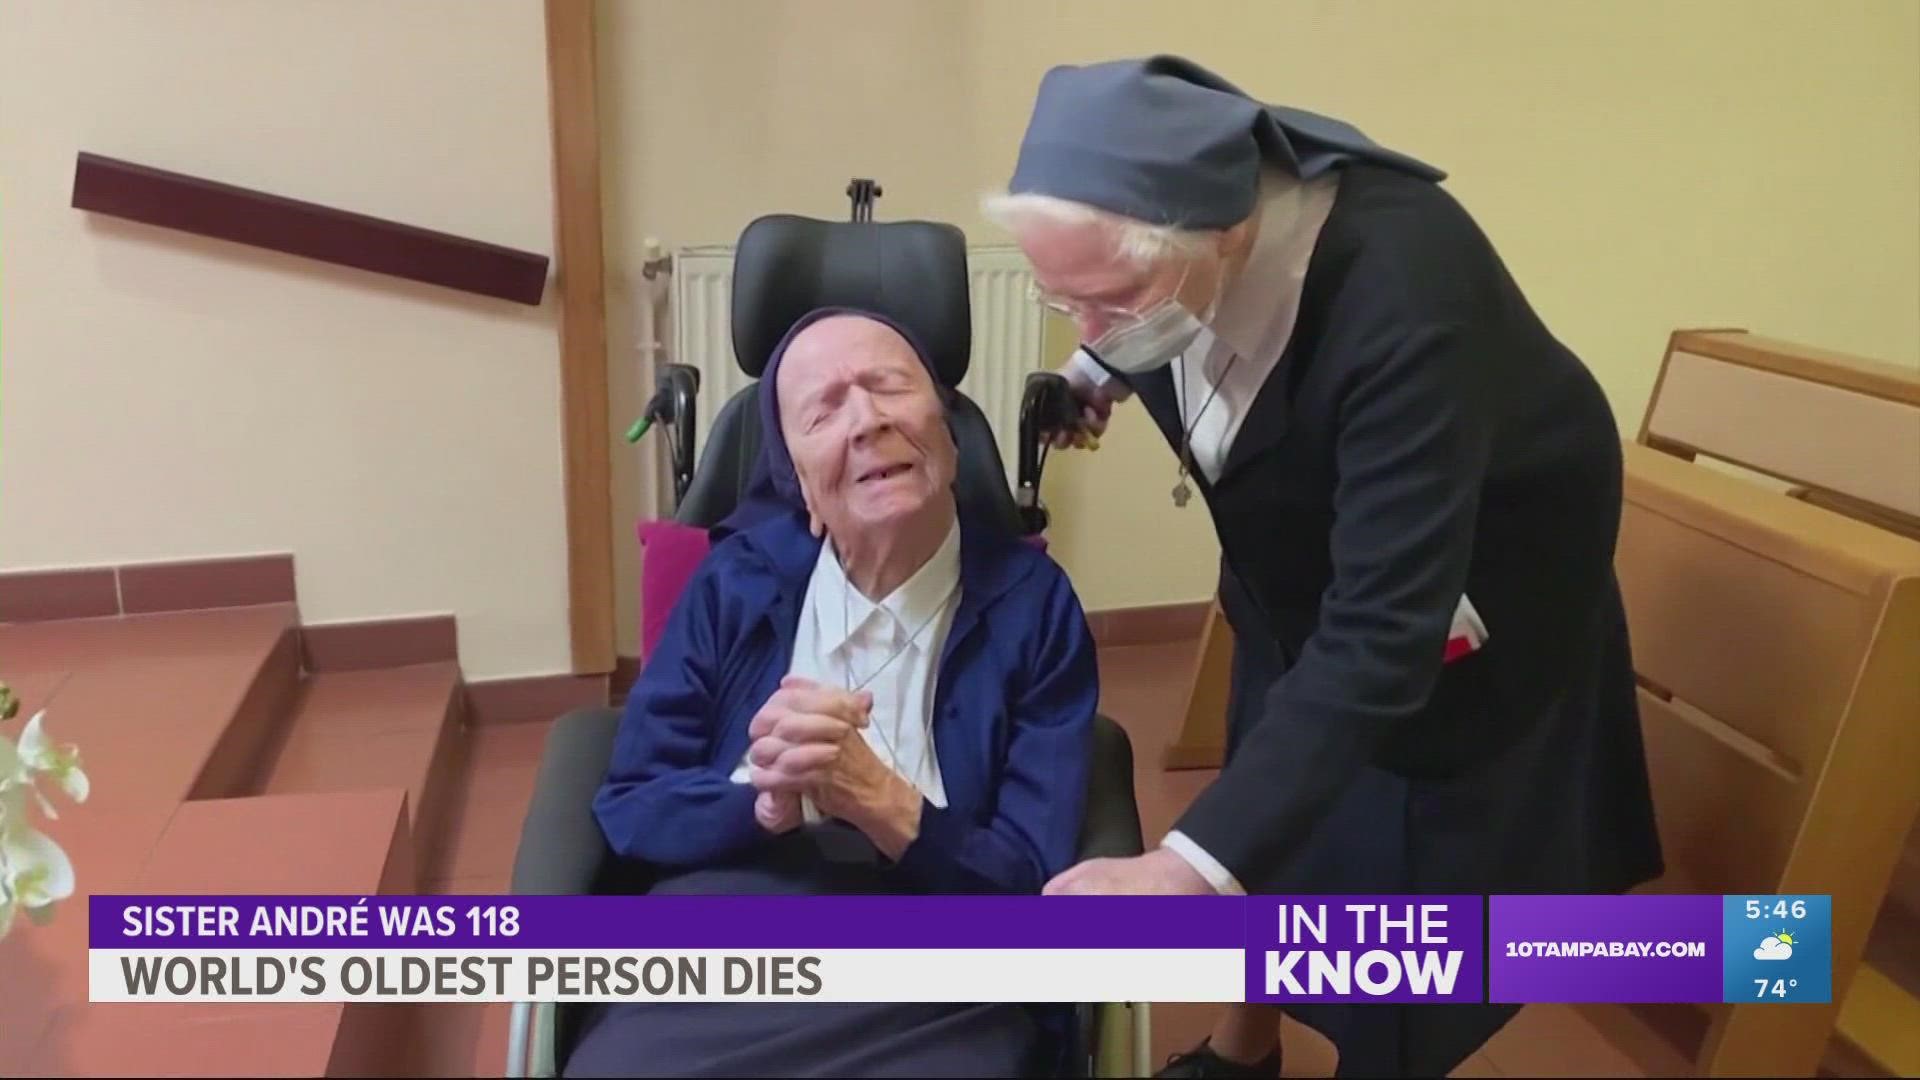 Sister André was just a few years away from becoming the oldest person ever.